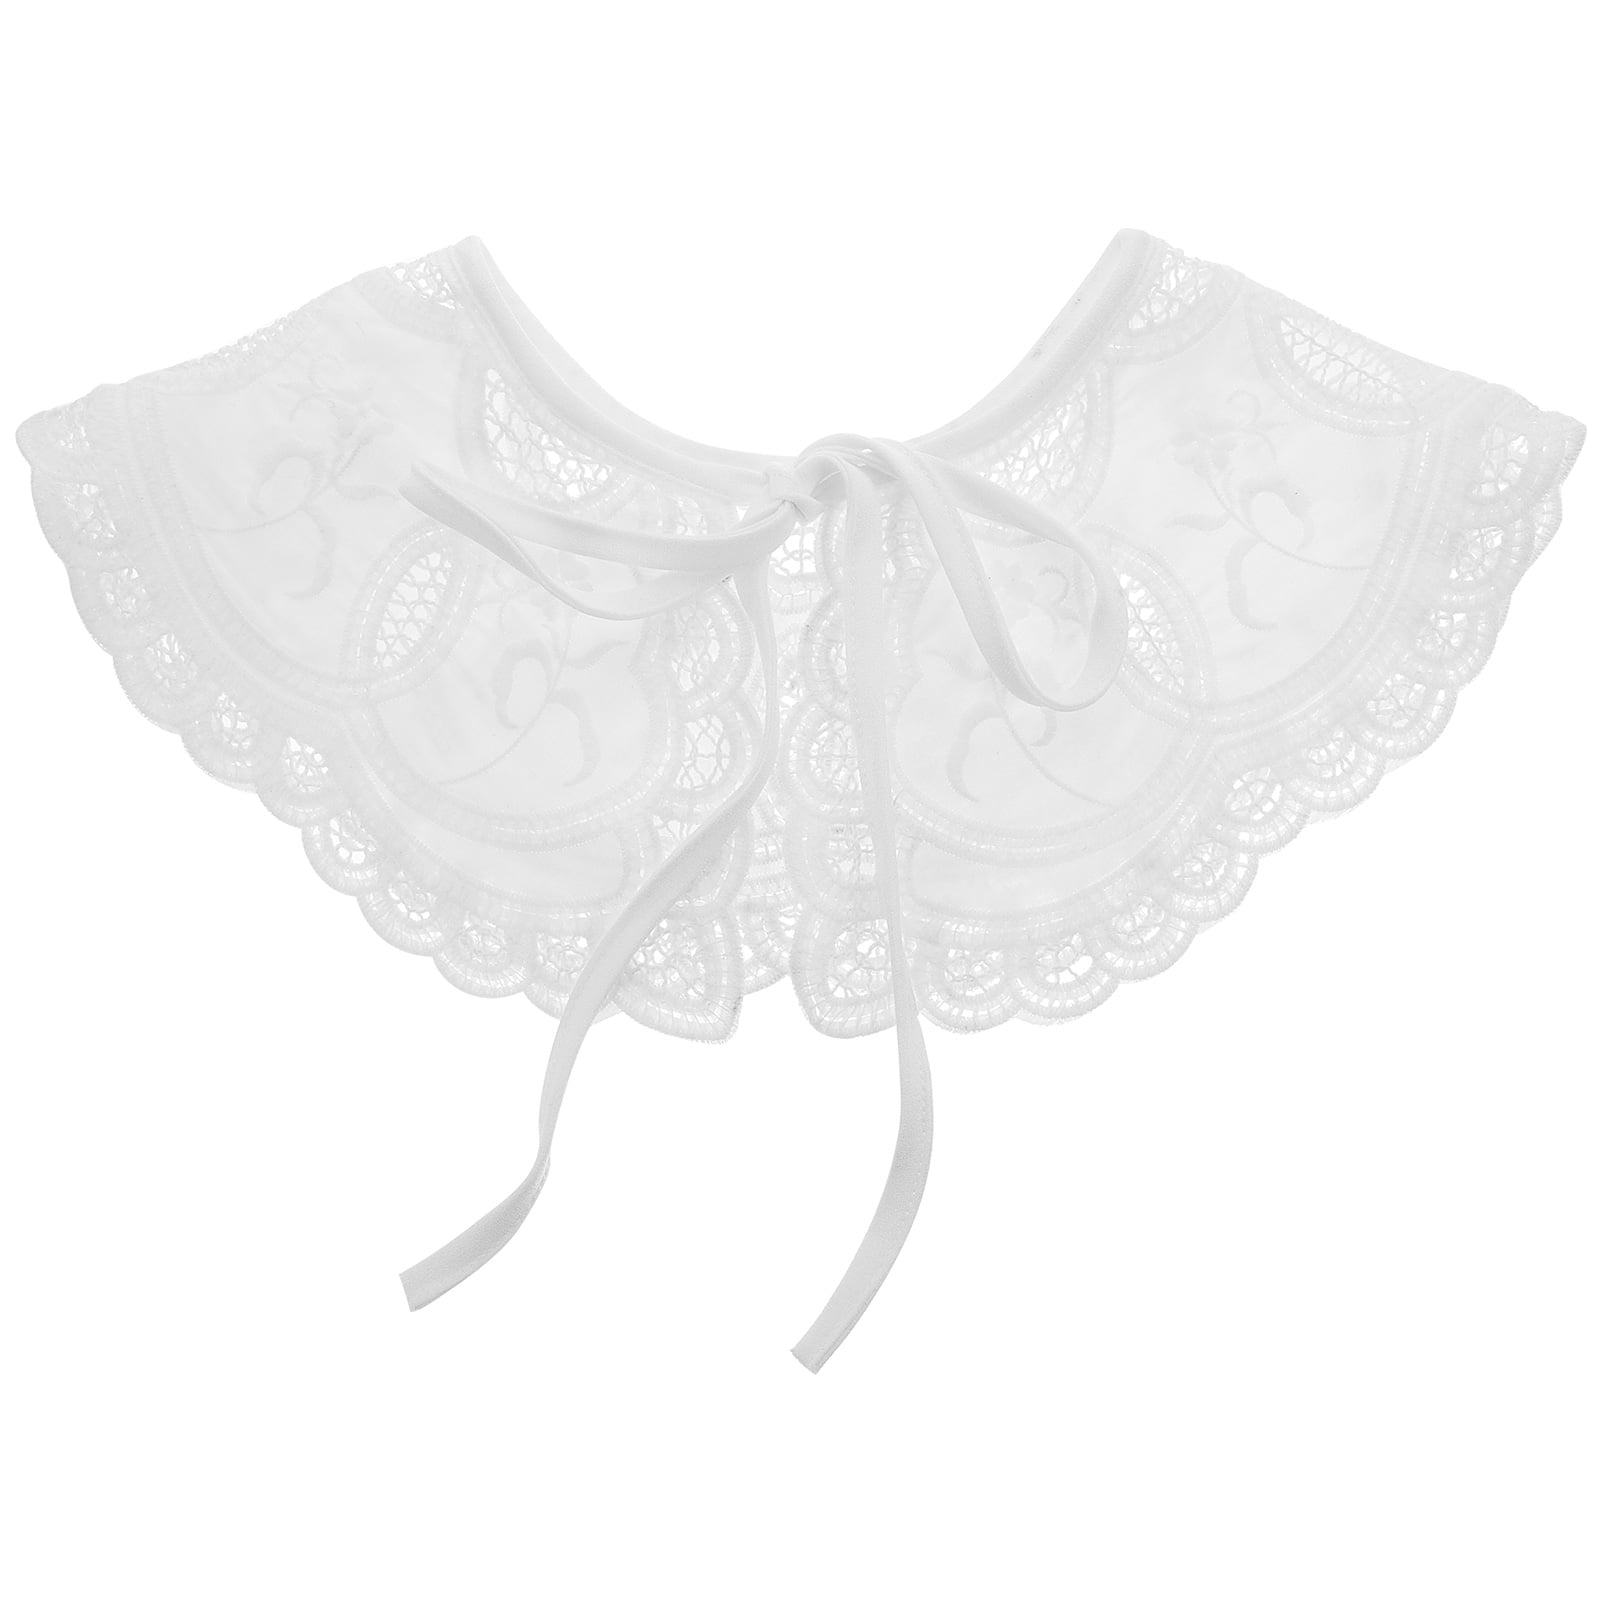 Lace Collar Fake False White Collars Shawl Pointed Dickie Antique ...